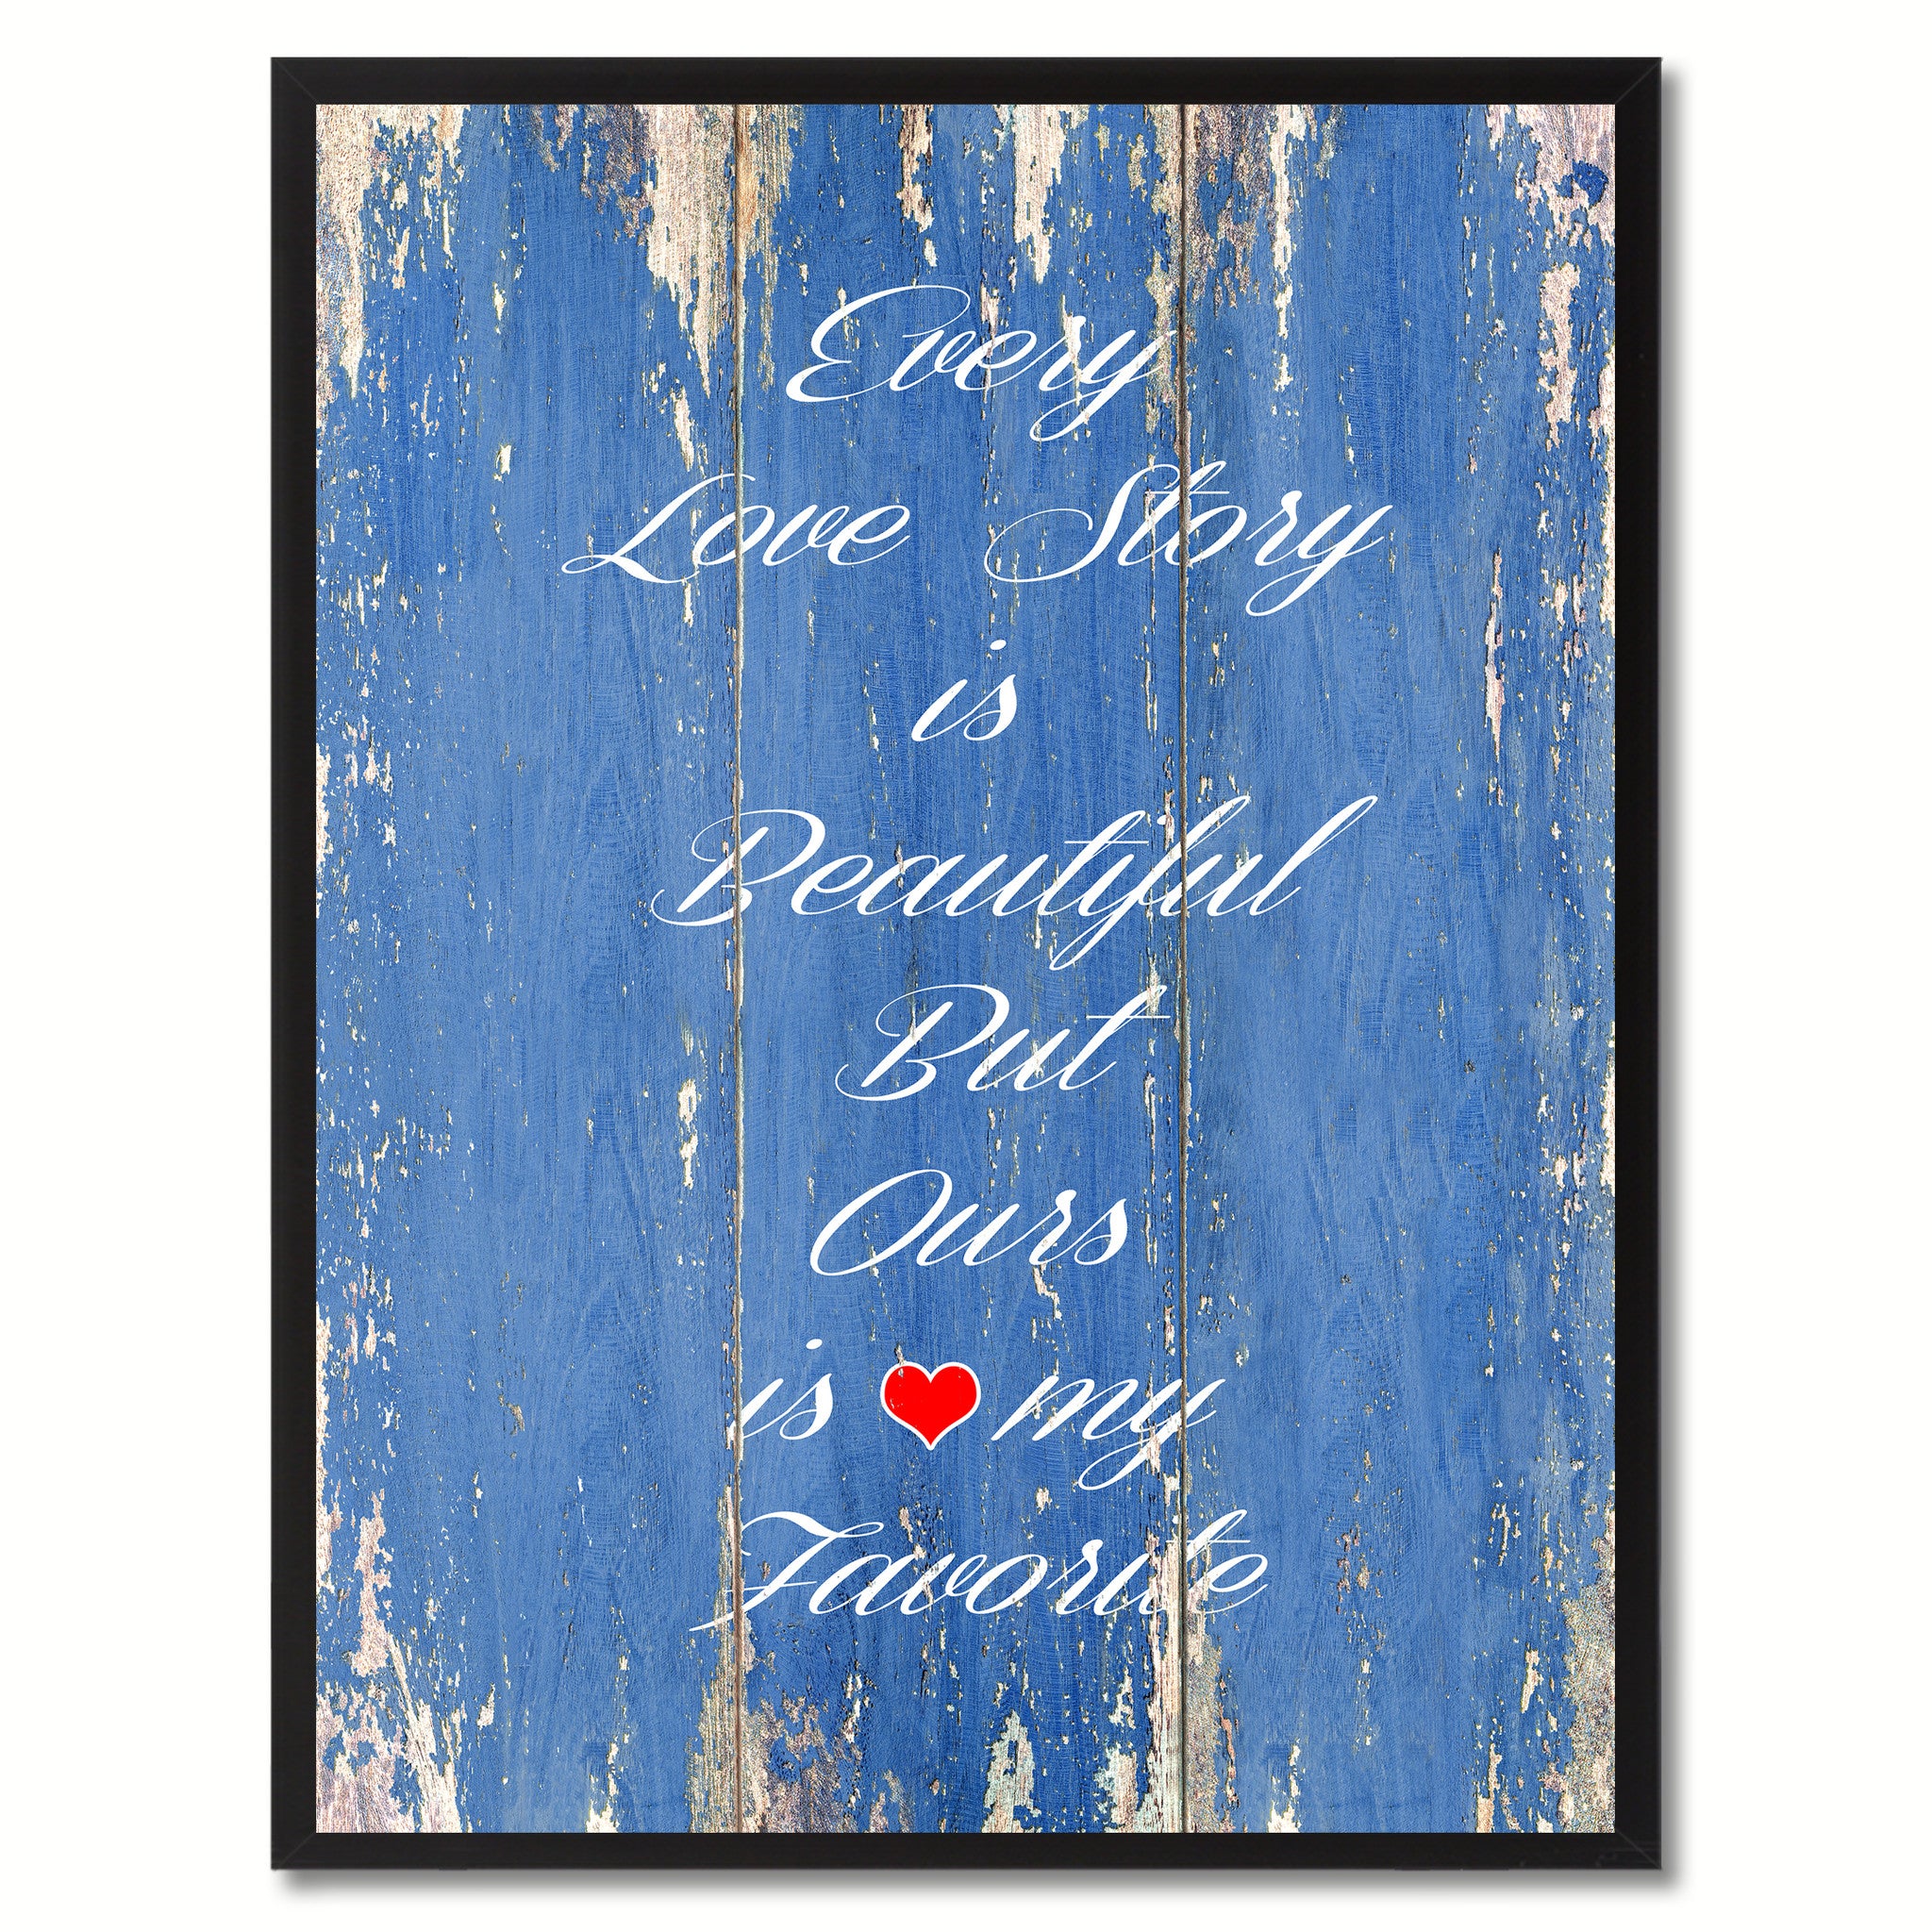 Every Love Story Is Beautiful Saying Canvas Print, Black Picture Frame Home Decor Wall Art Gifts